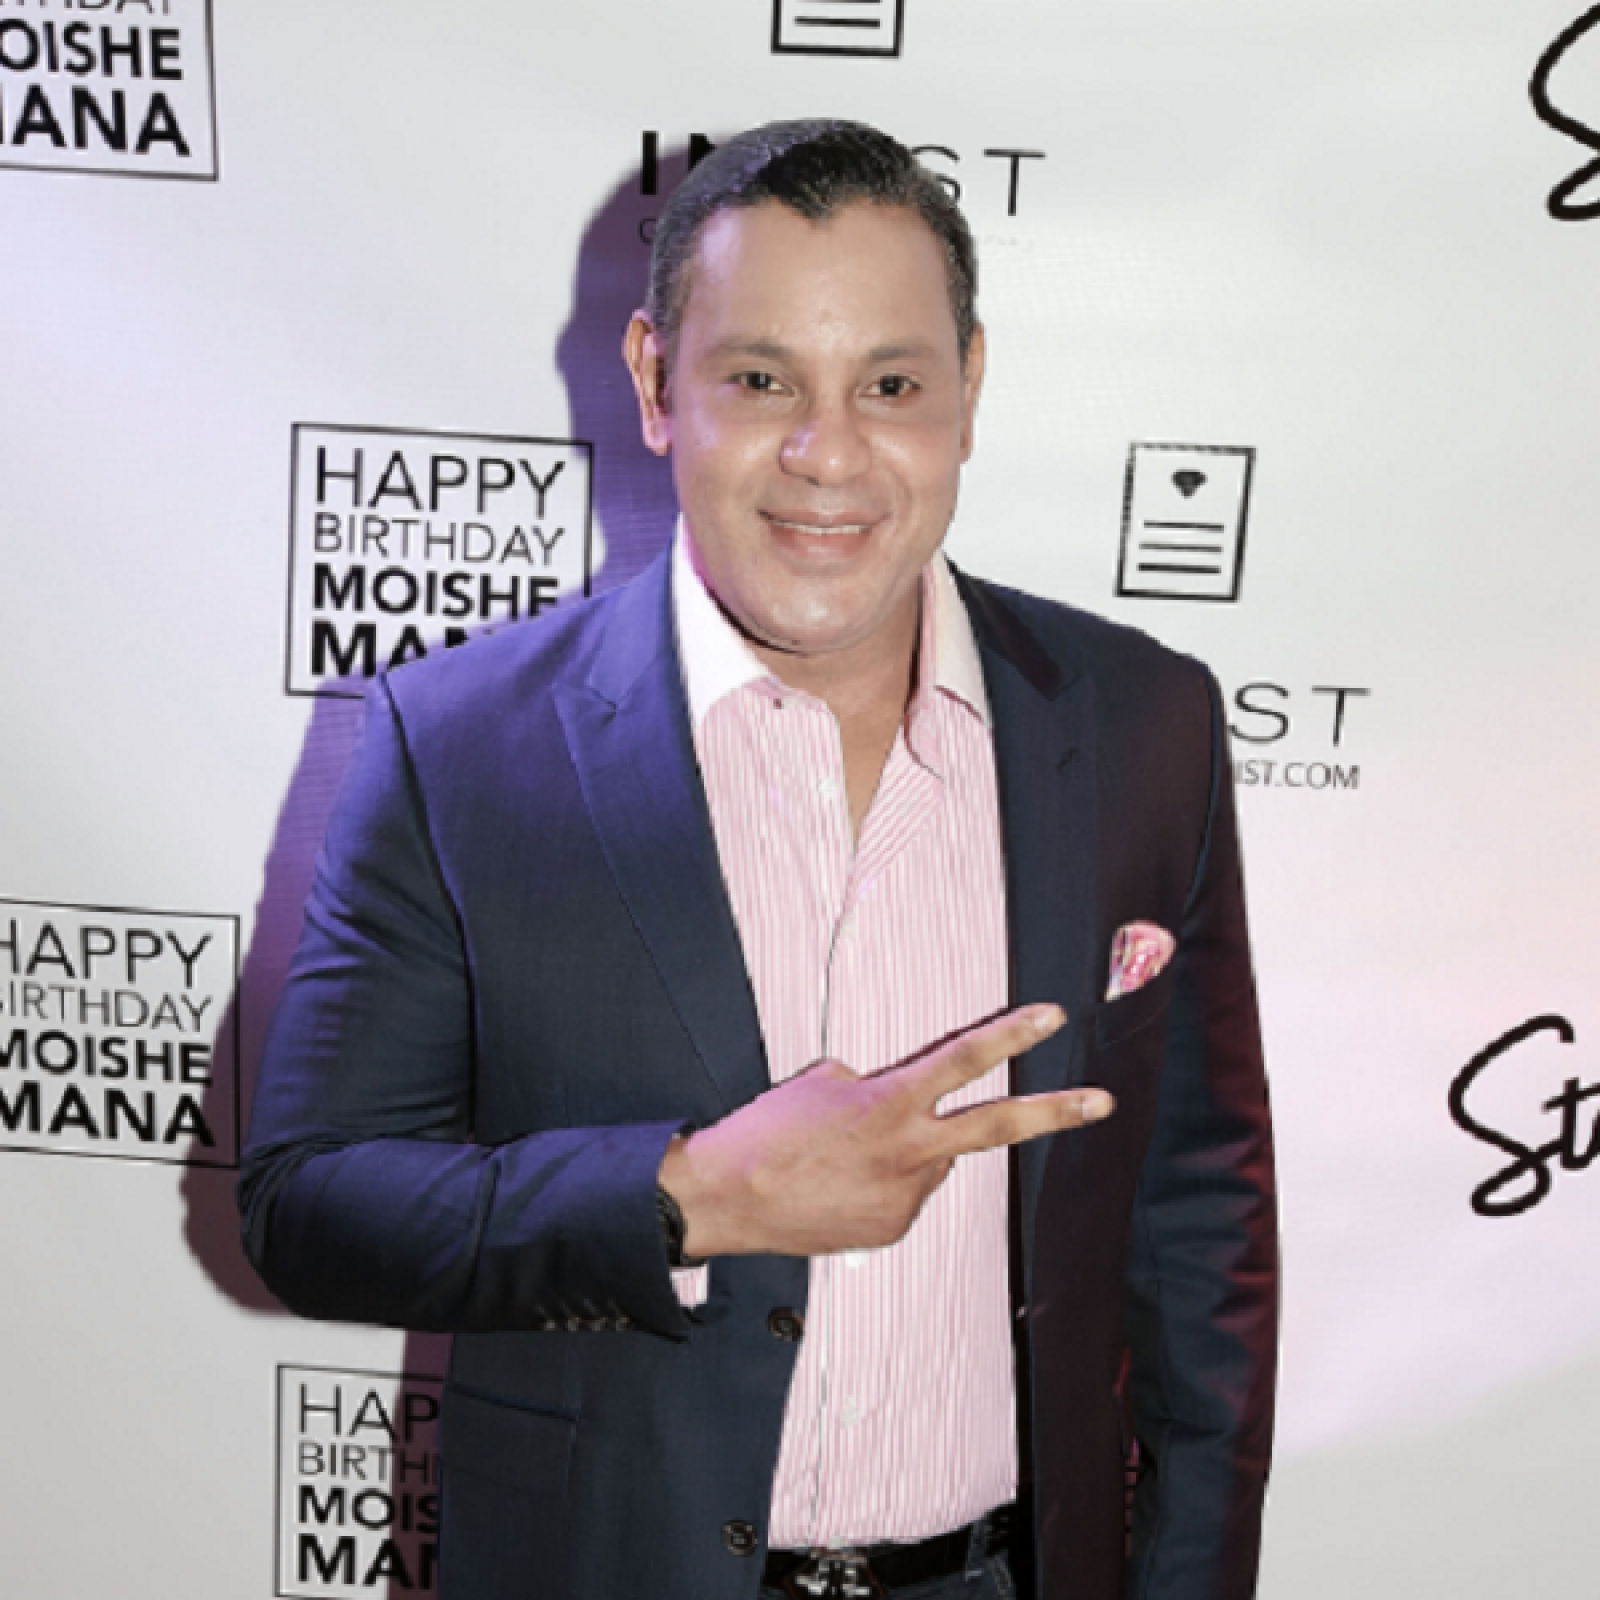 Latest Photos of Sammy Sosa Suggest His Skin Is Lighter Than Ever